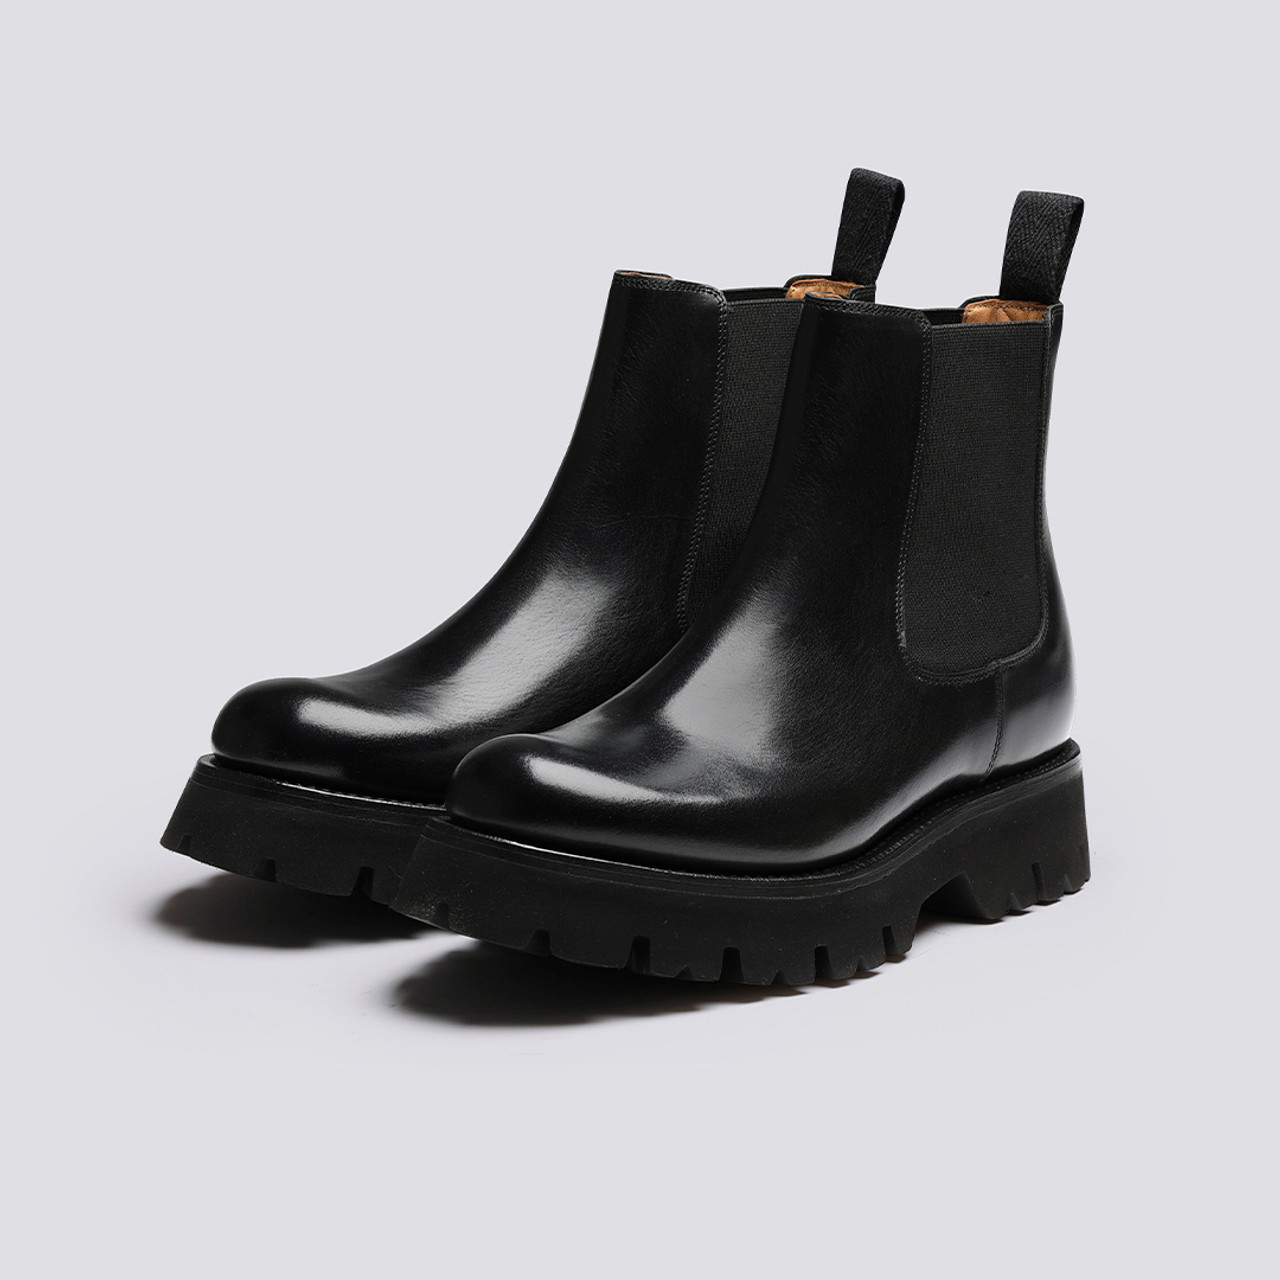 Harlow | Chelsea Boots for Women in Black Leather | Grenson